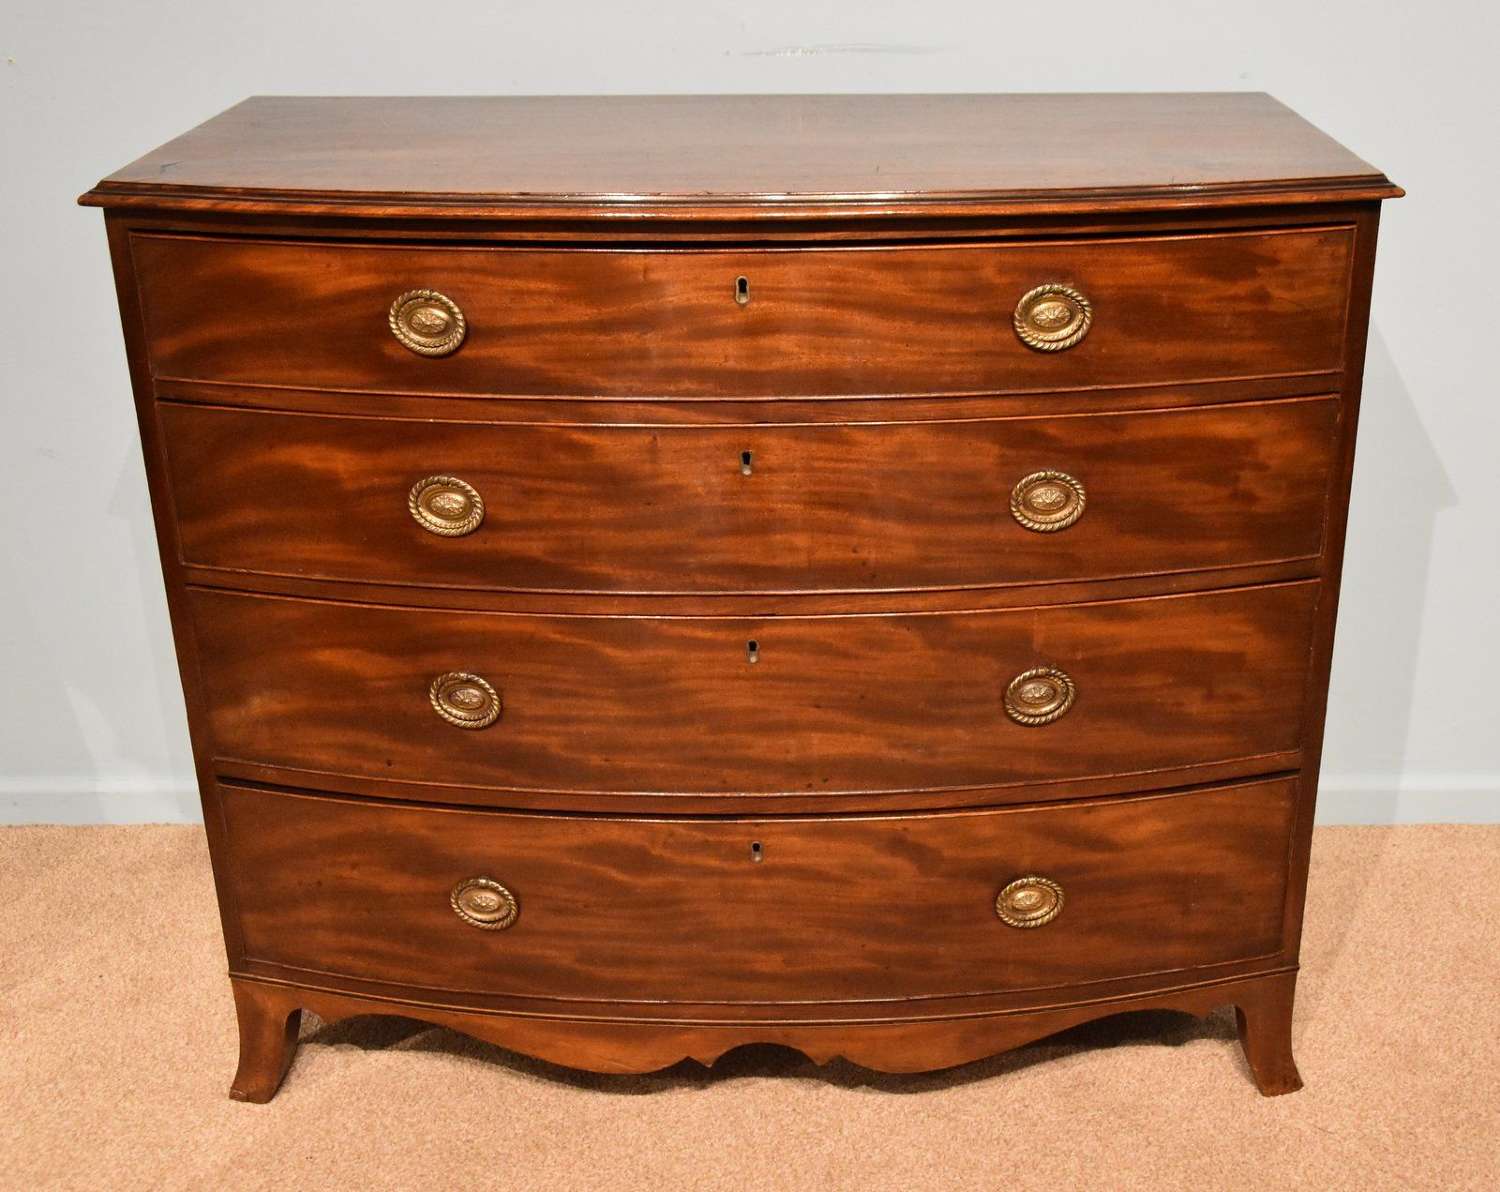 George III Bow Fronted Mahogany Chest of Drawers